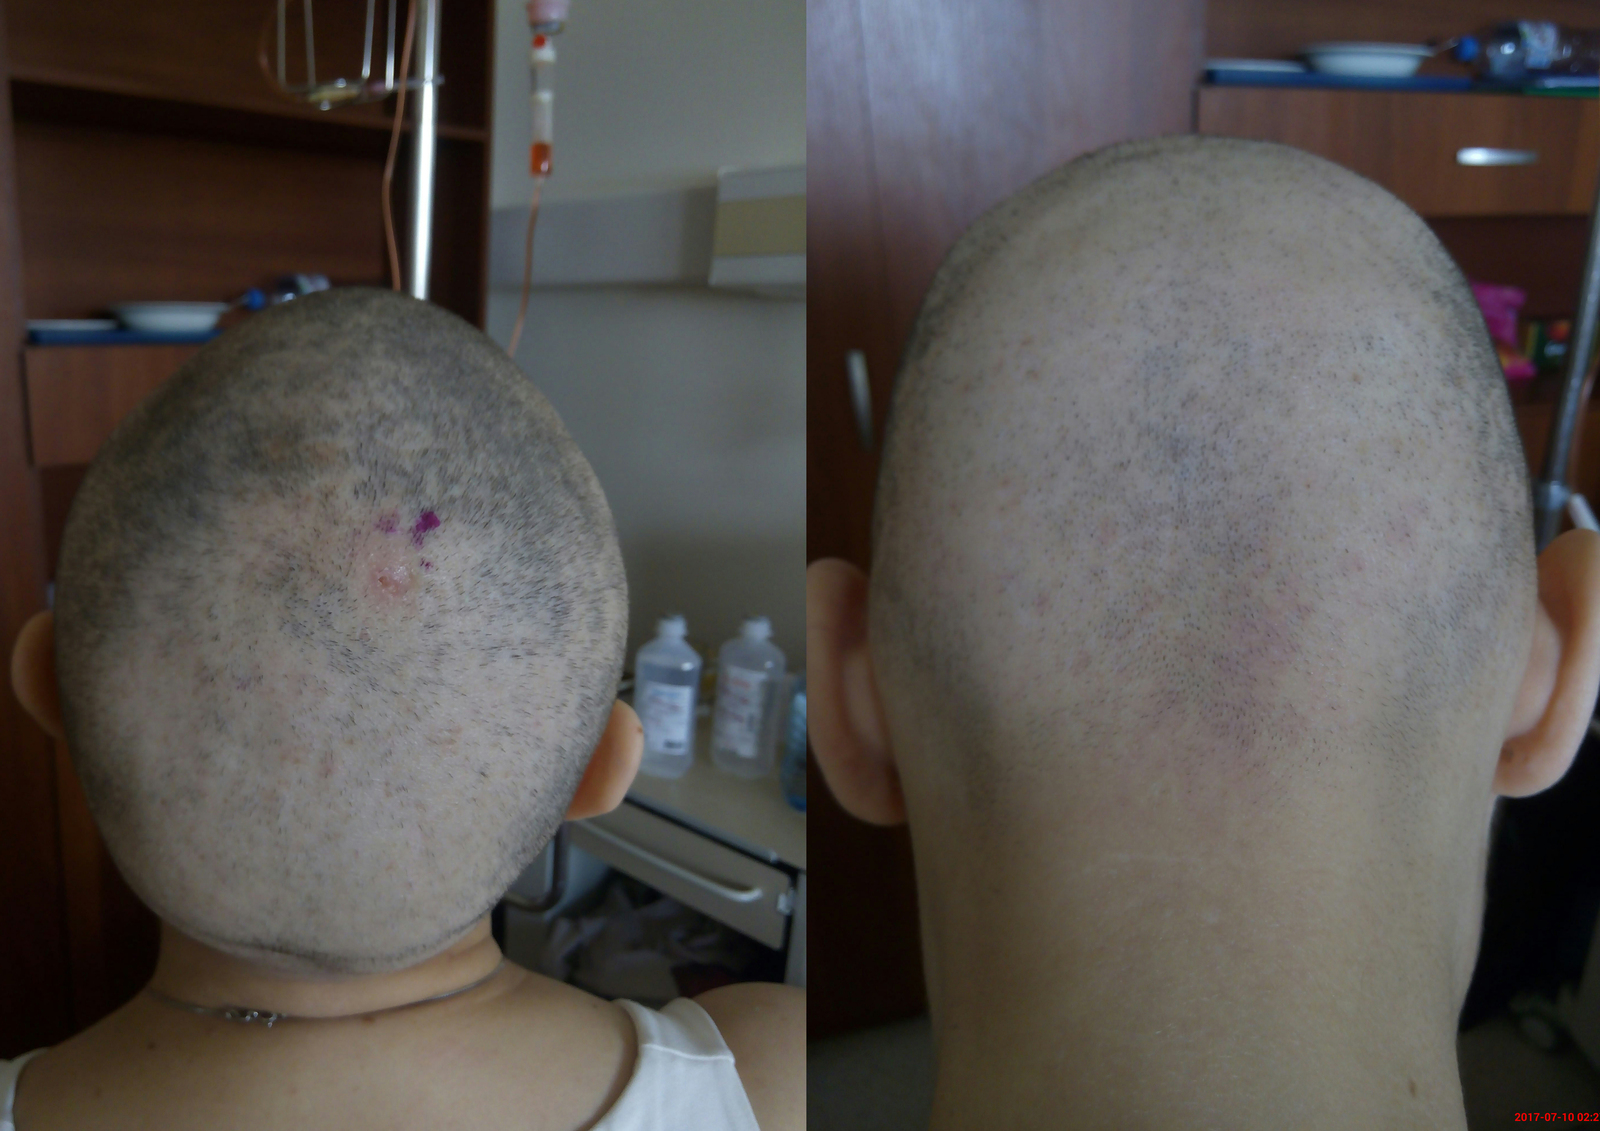 TREATMENT OF HODGKIN'S LYMPHOMA. ESSAY ABOUT HOW I SPENT THE SUMMER. - My, Oncology, Hodgkin's lymphoma, , Chemotherapy, bald, Allopecia, Experiences, Thank you, Longpost